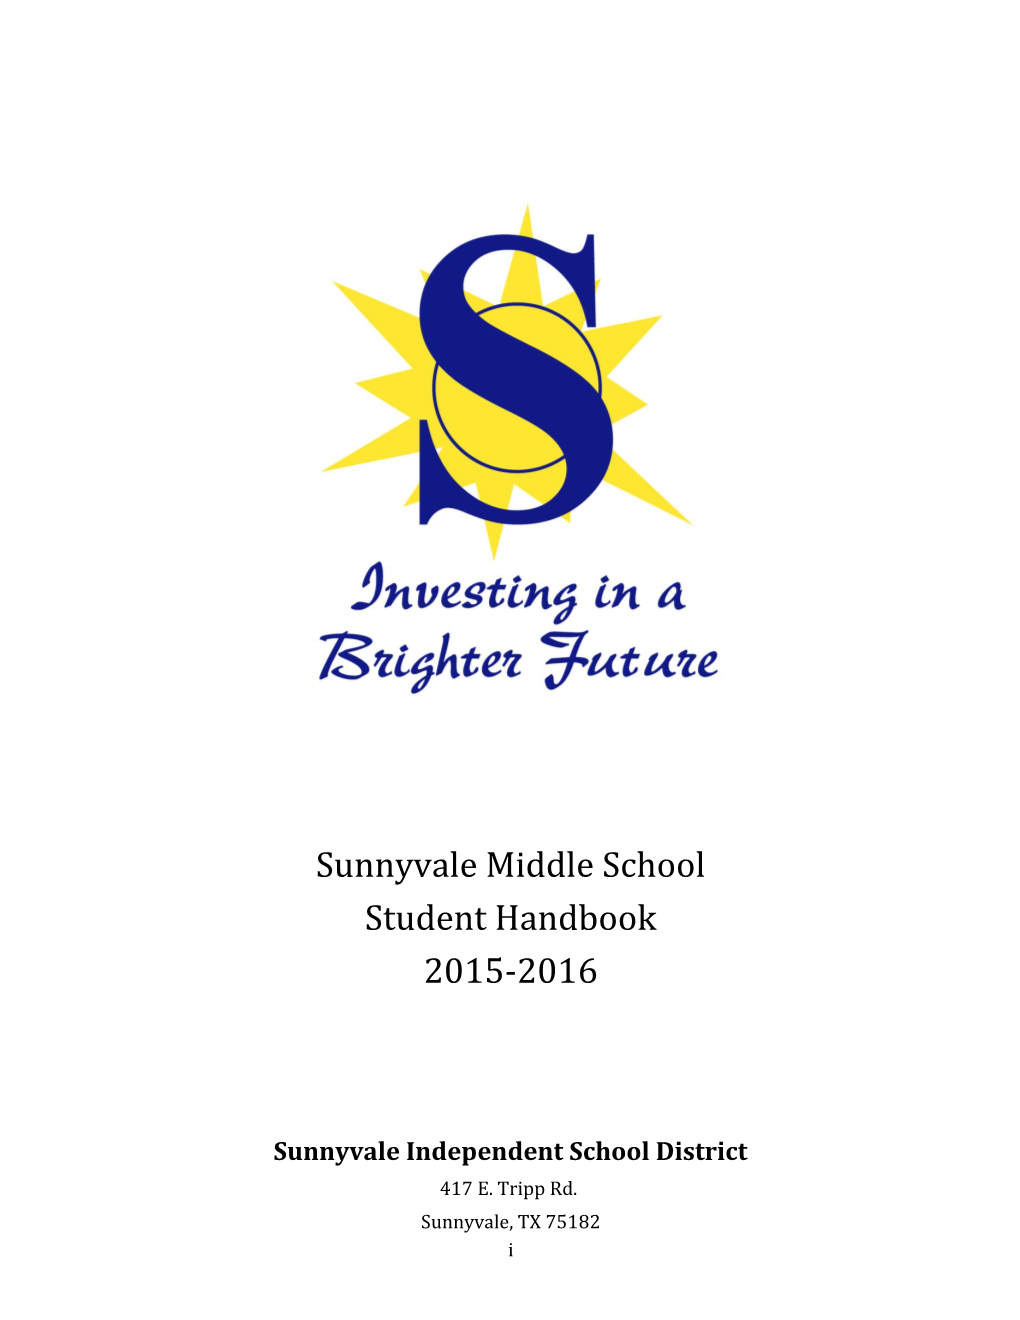 Sunnyvale Independent School District